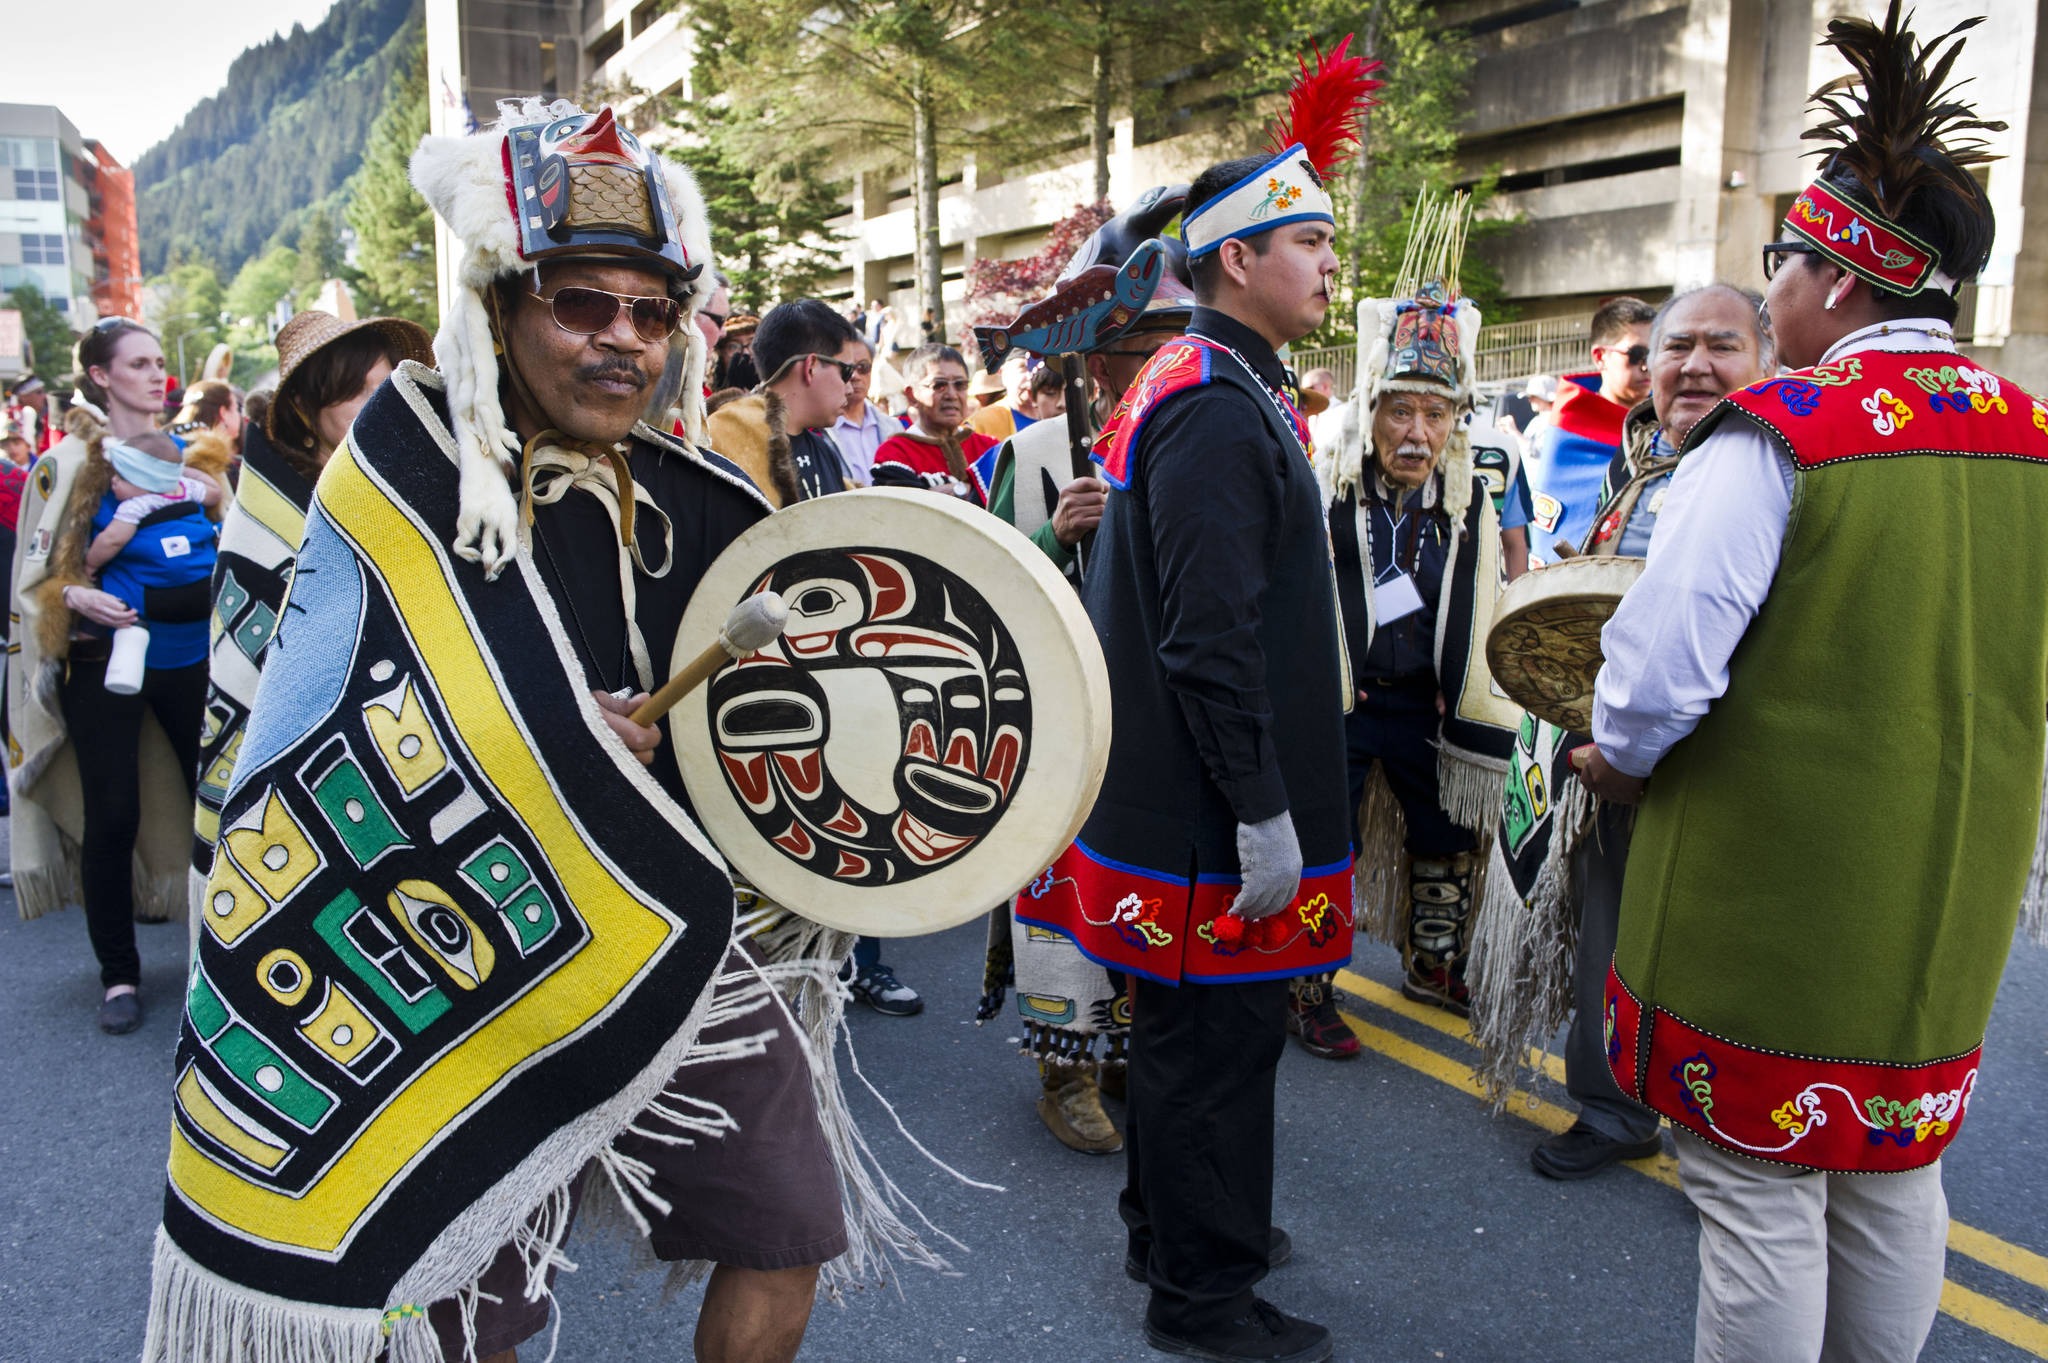 Fifty Tlingit, Haida, and Tsimshian groups dressed in traditional regalia take part in the Grand Entrance Processional down Willoughby Street from Elizabeth Peratrovich Hall to Centennial Hall to kickoff the four days of Celebration in June 2016. (Michael Penn | Juneau Empire file)